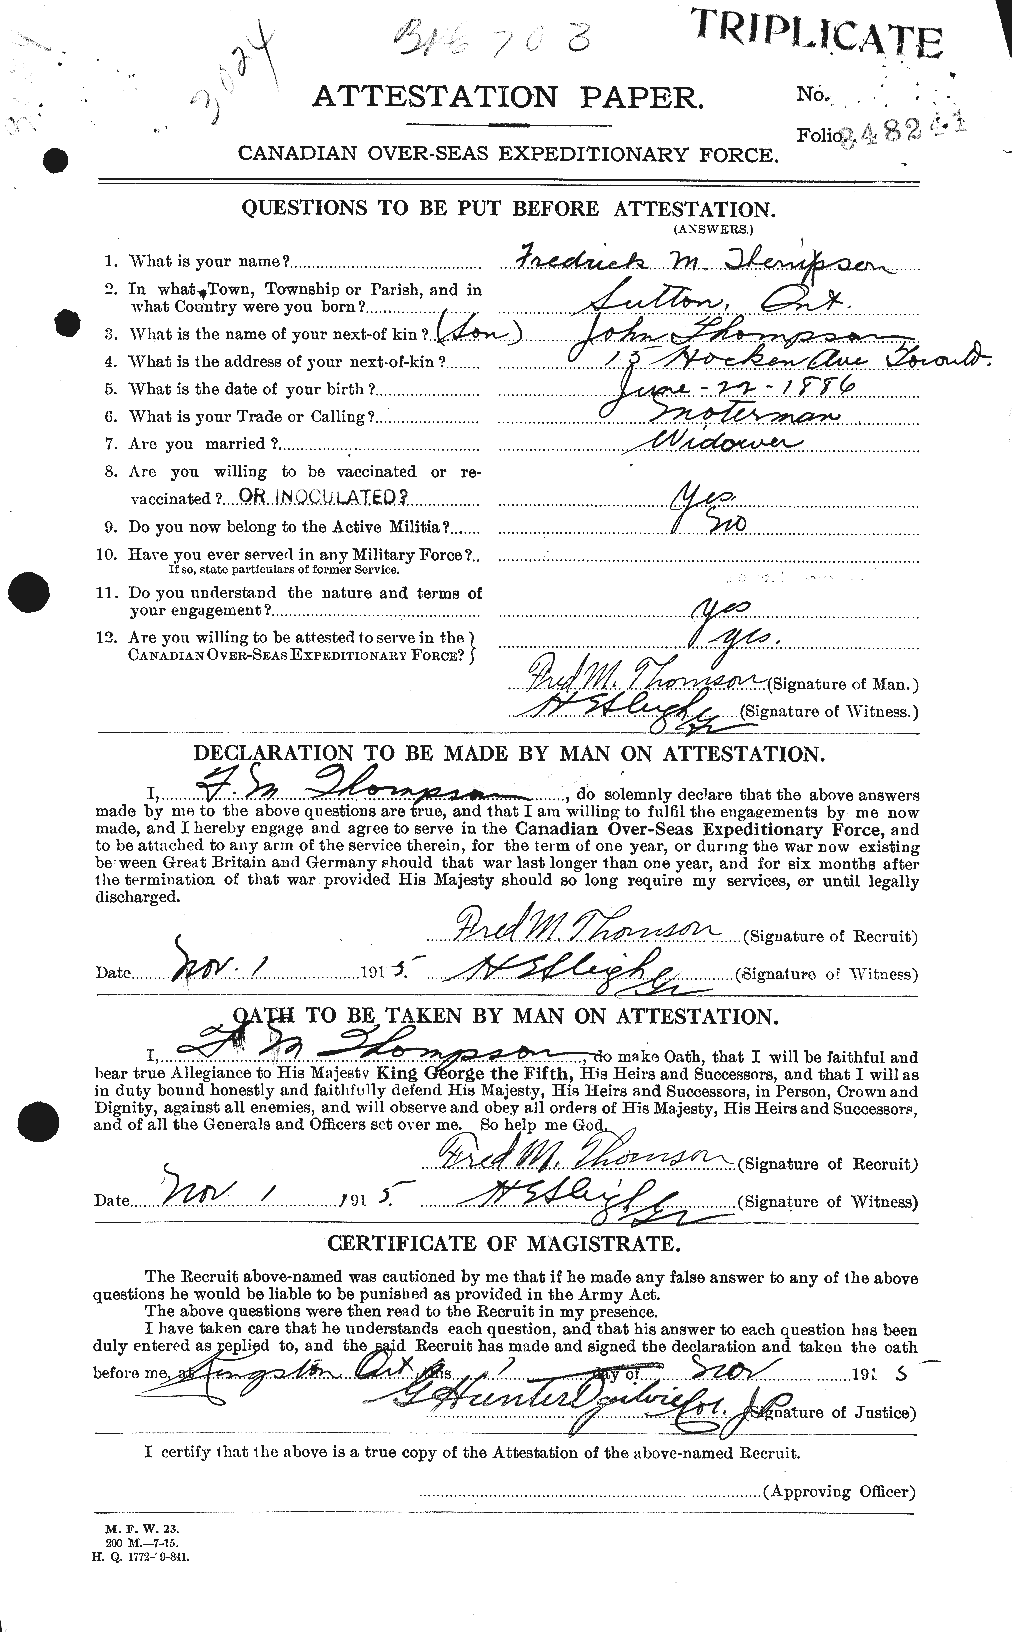 Personnel Records of the First World War - CEF 633682a